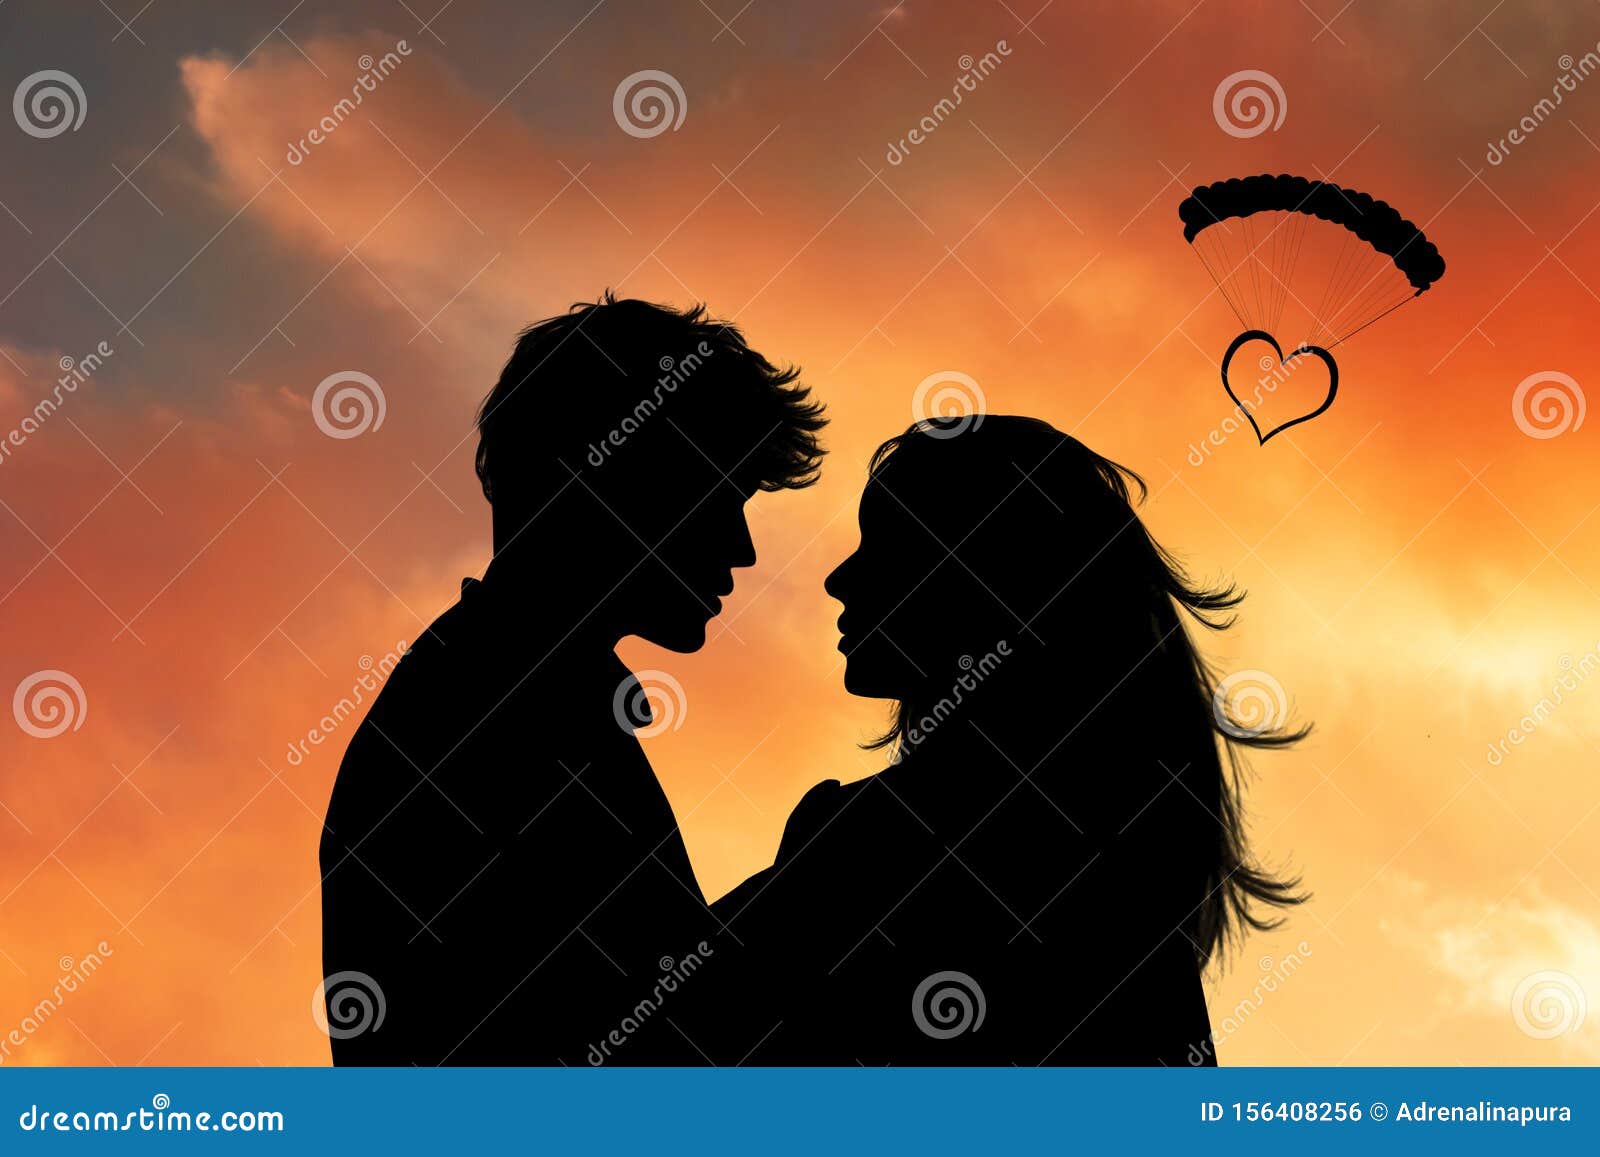 faces of two lovers at sunset with a heart